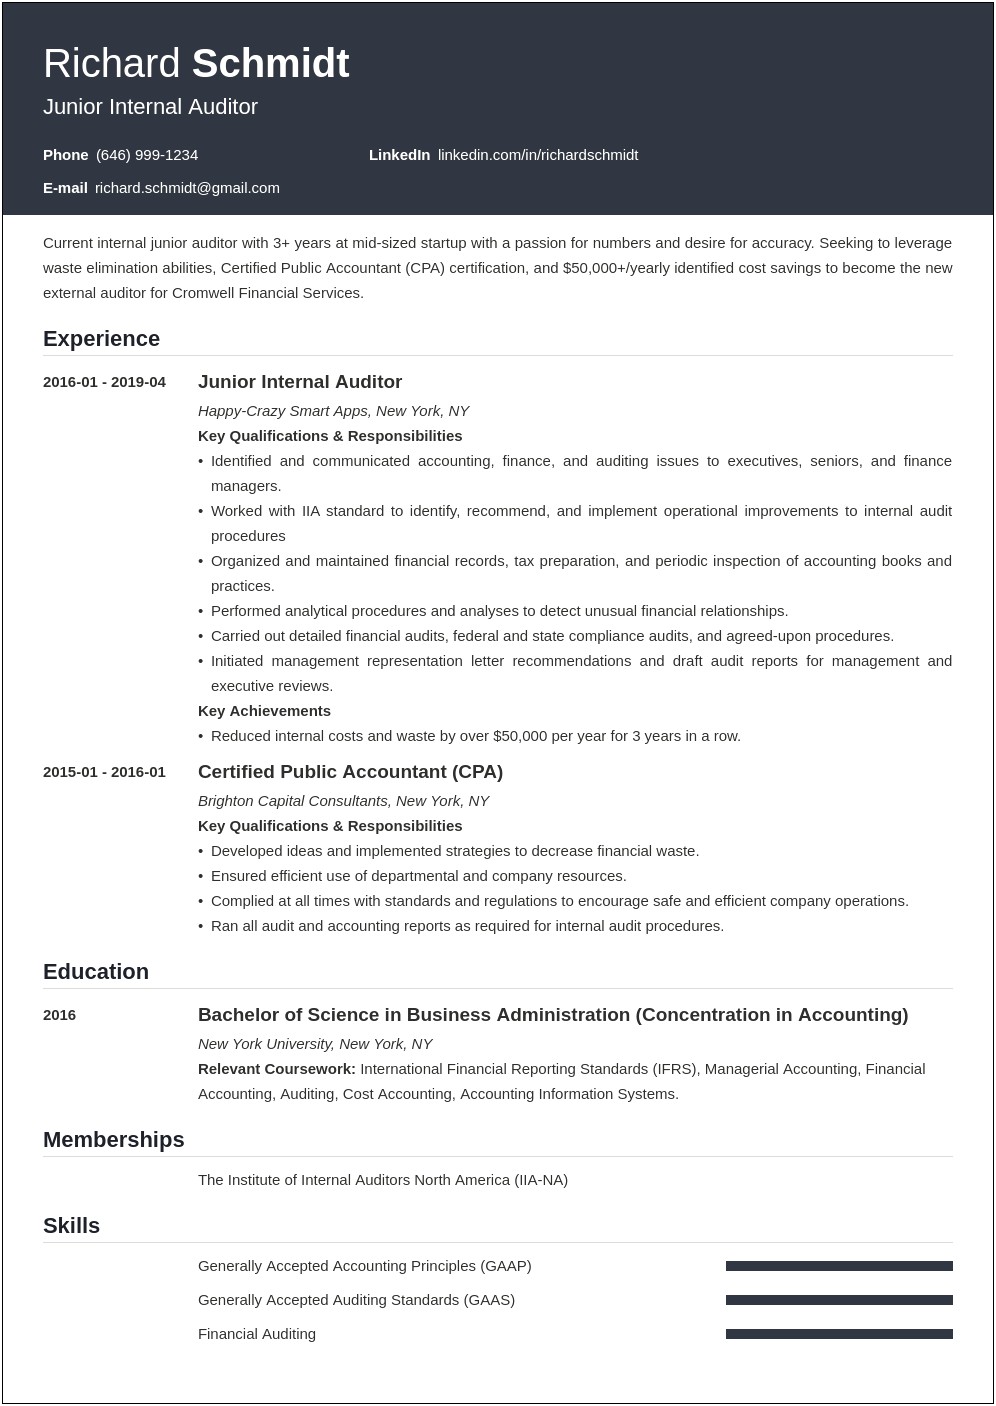 Resume Summary Examples For Internal Auditor